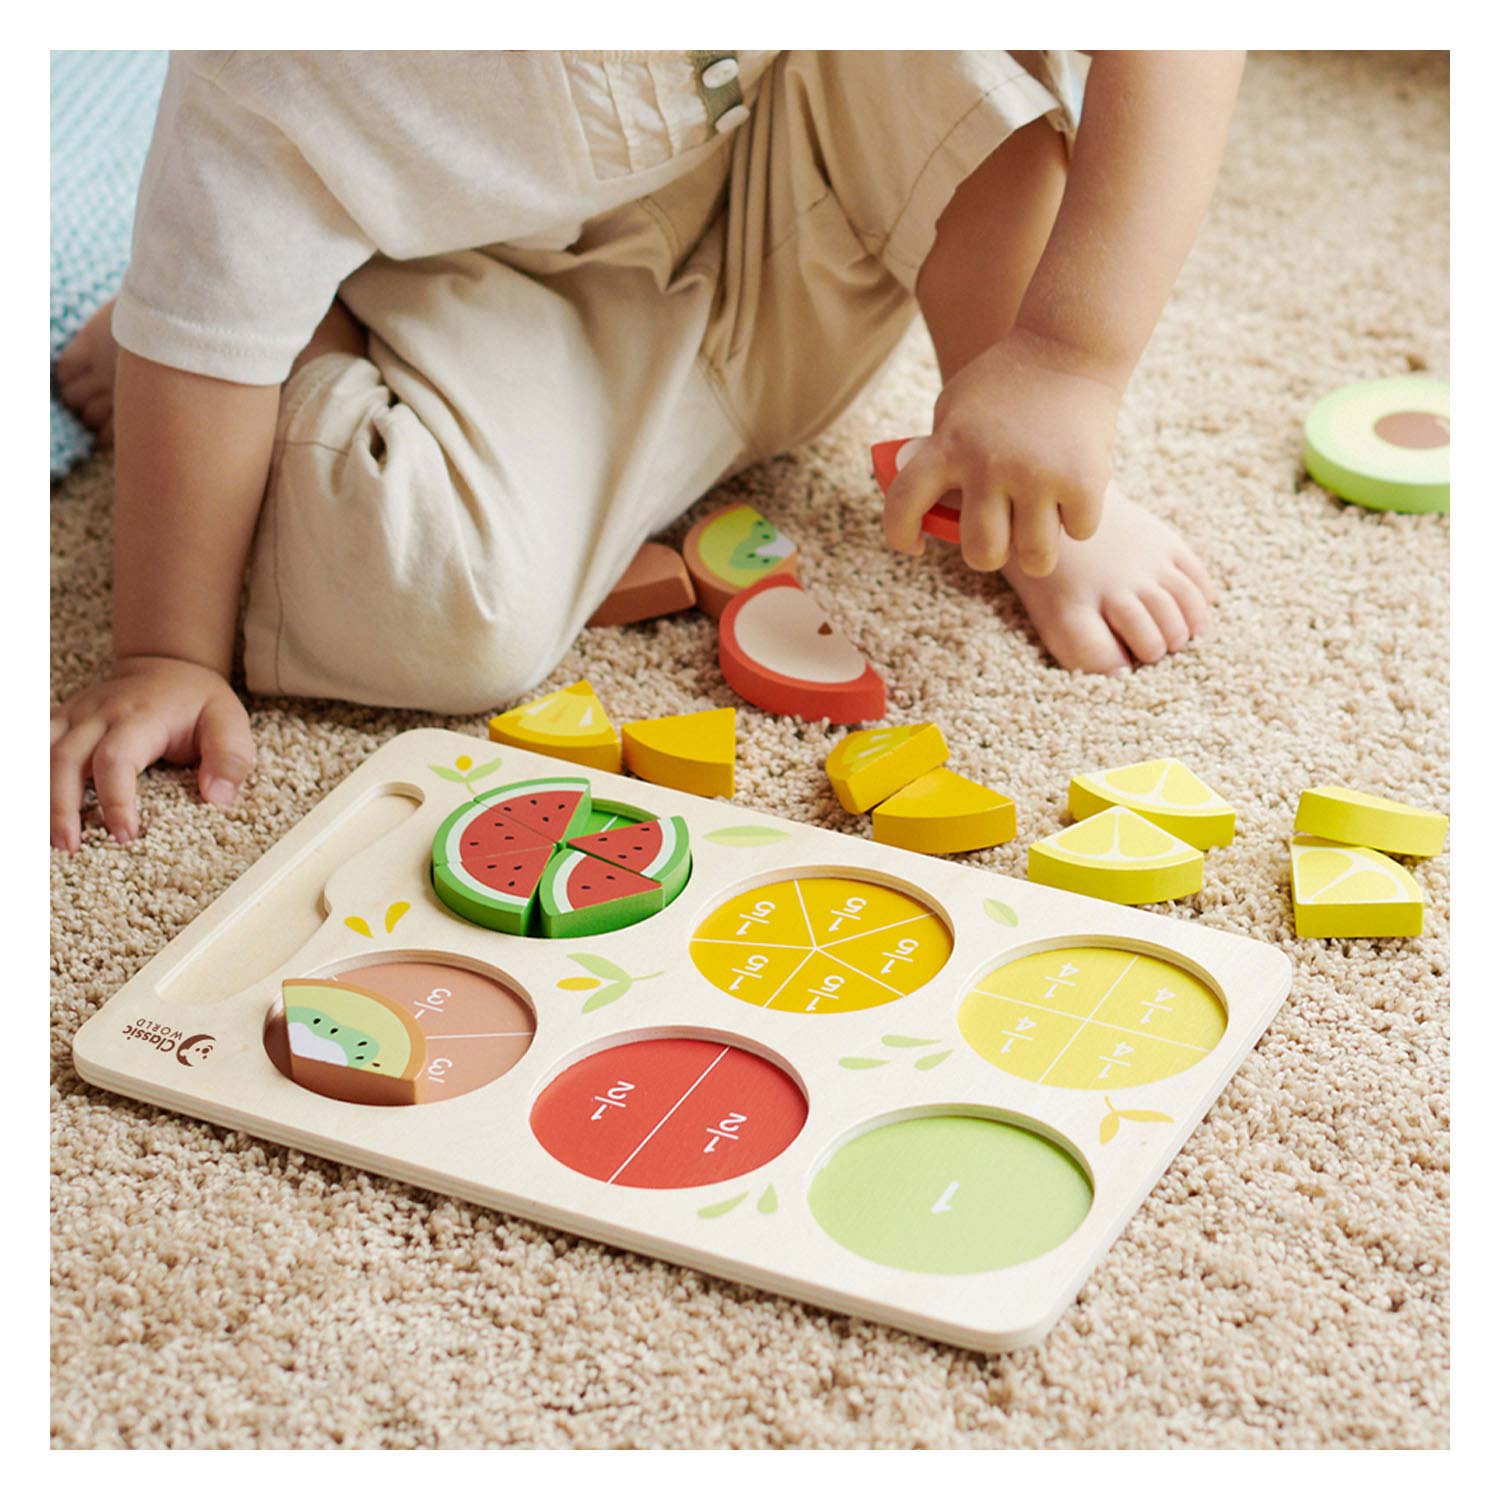 Classic World Cutting Fruit Puzzle Wooden